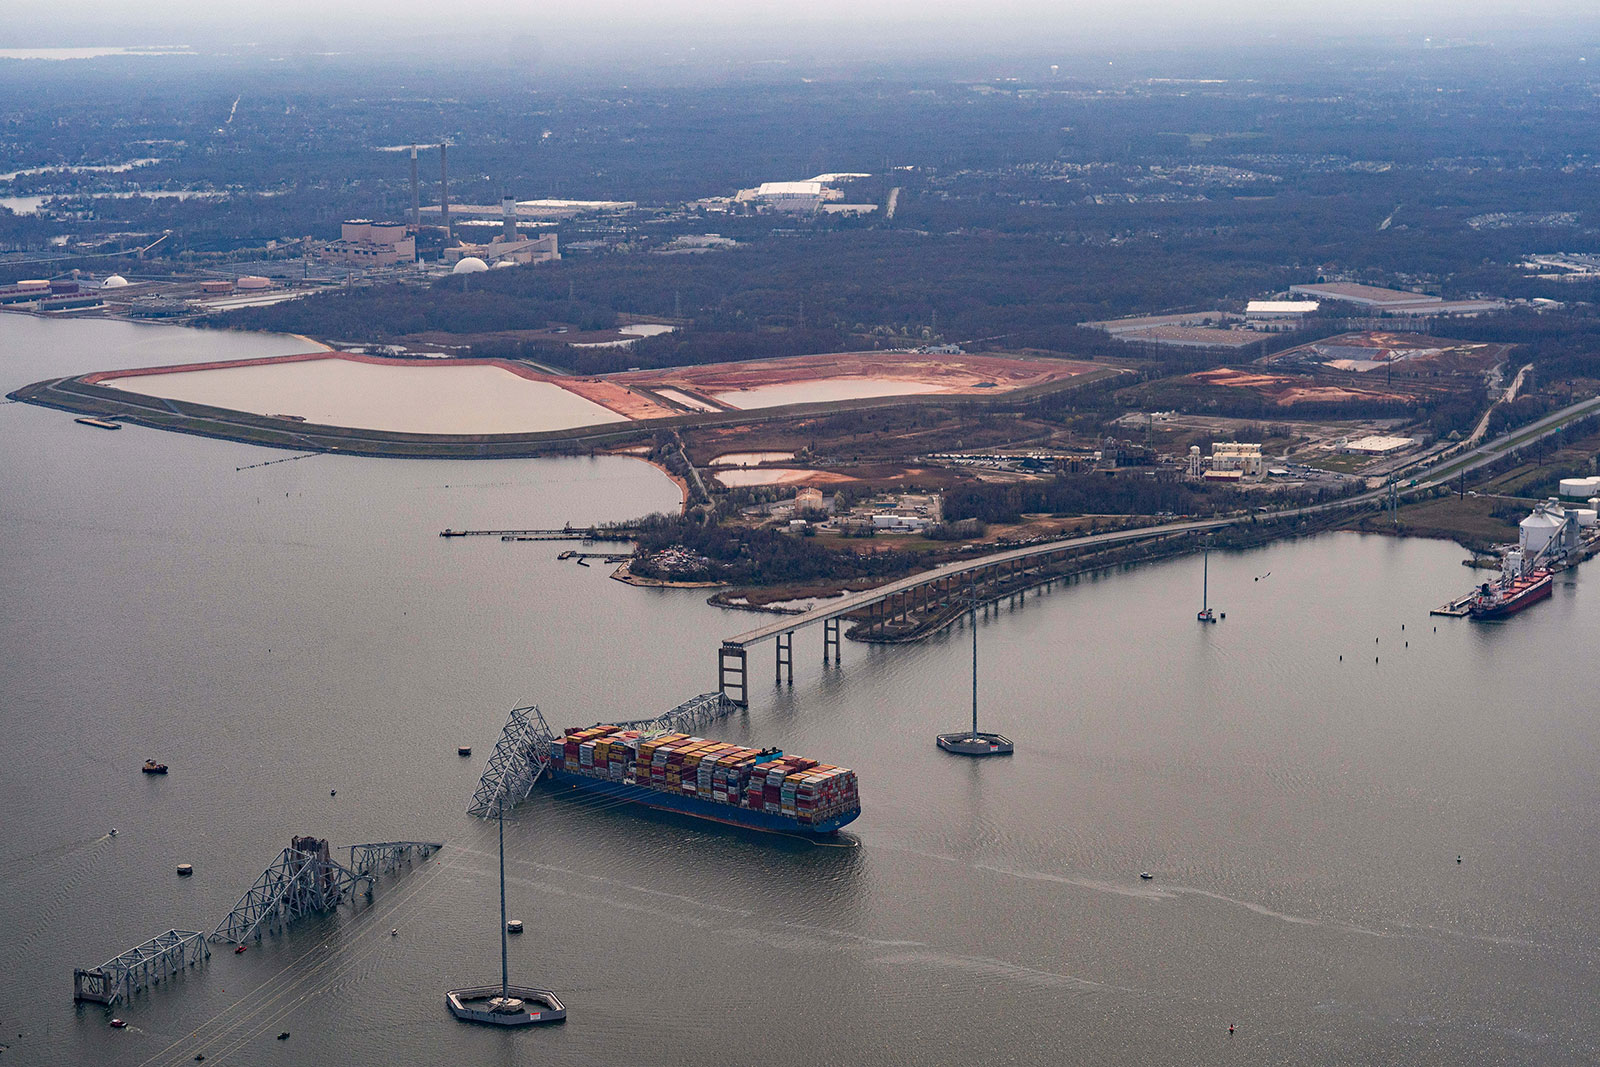 The Dali container vessel after striking the Francis Scott Key Bridge that collapsed into the Patapsco River in Baltimore, Maryland, on Tuesday, March 26.